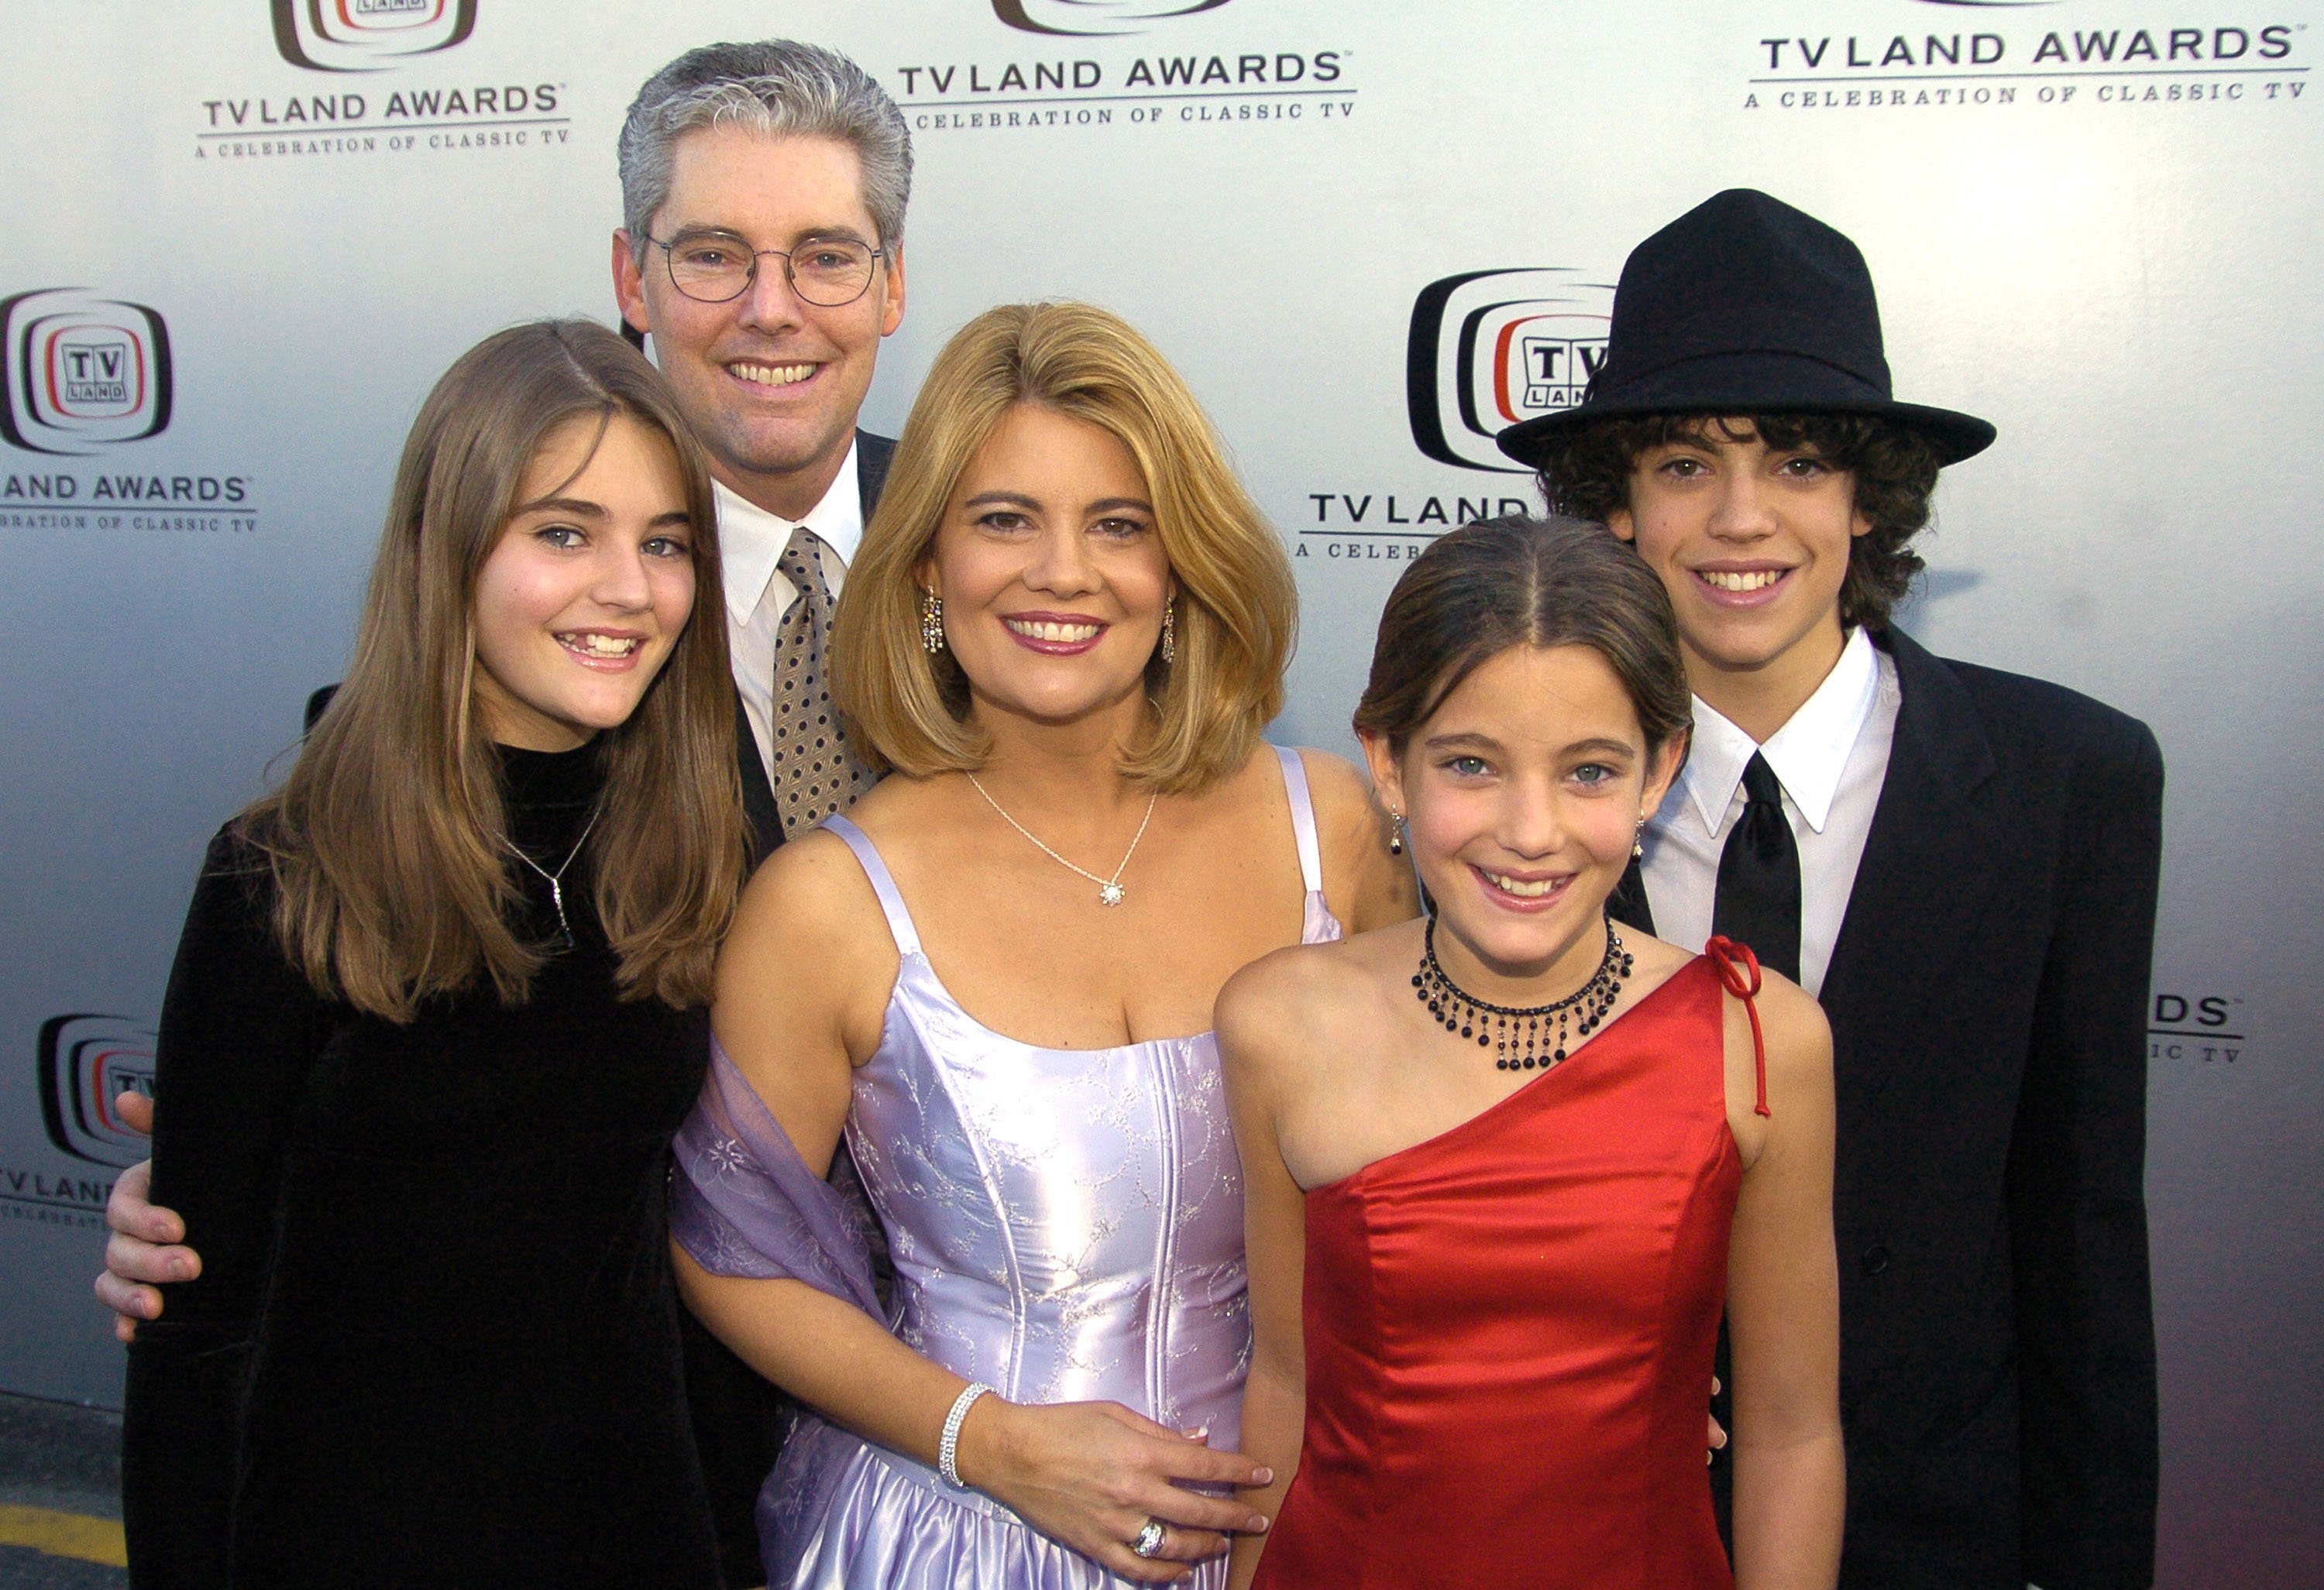 Lisa Whelchel and family during 2004 TV Land Awards airing March 17, 2004 - Red Carpet Arrivals at The Palladium in Hollywood, California, United States | Source: Getty Images 